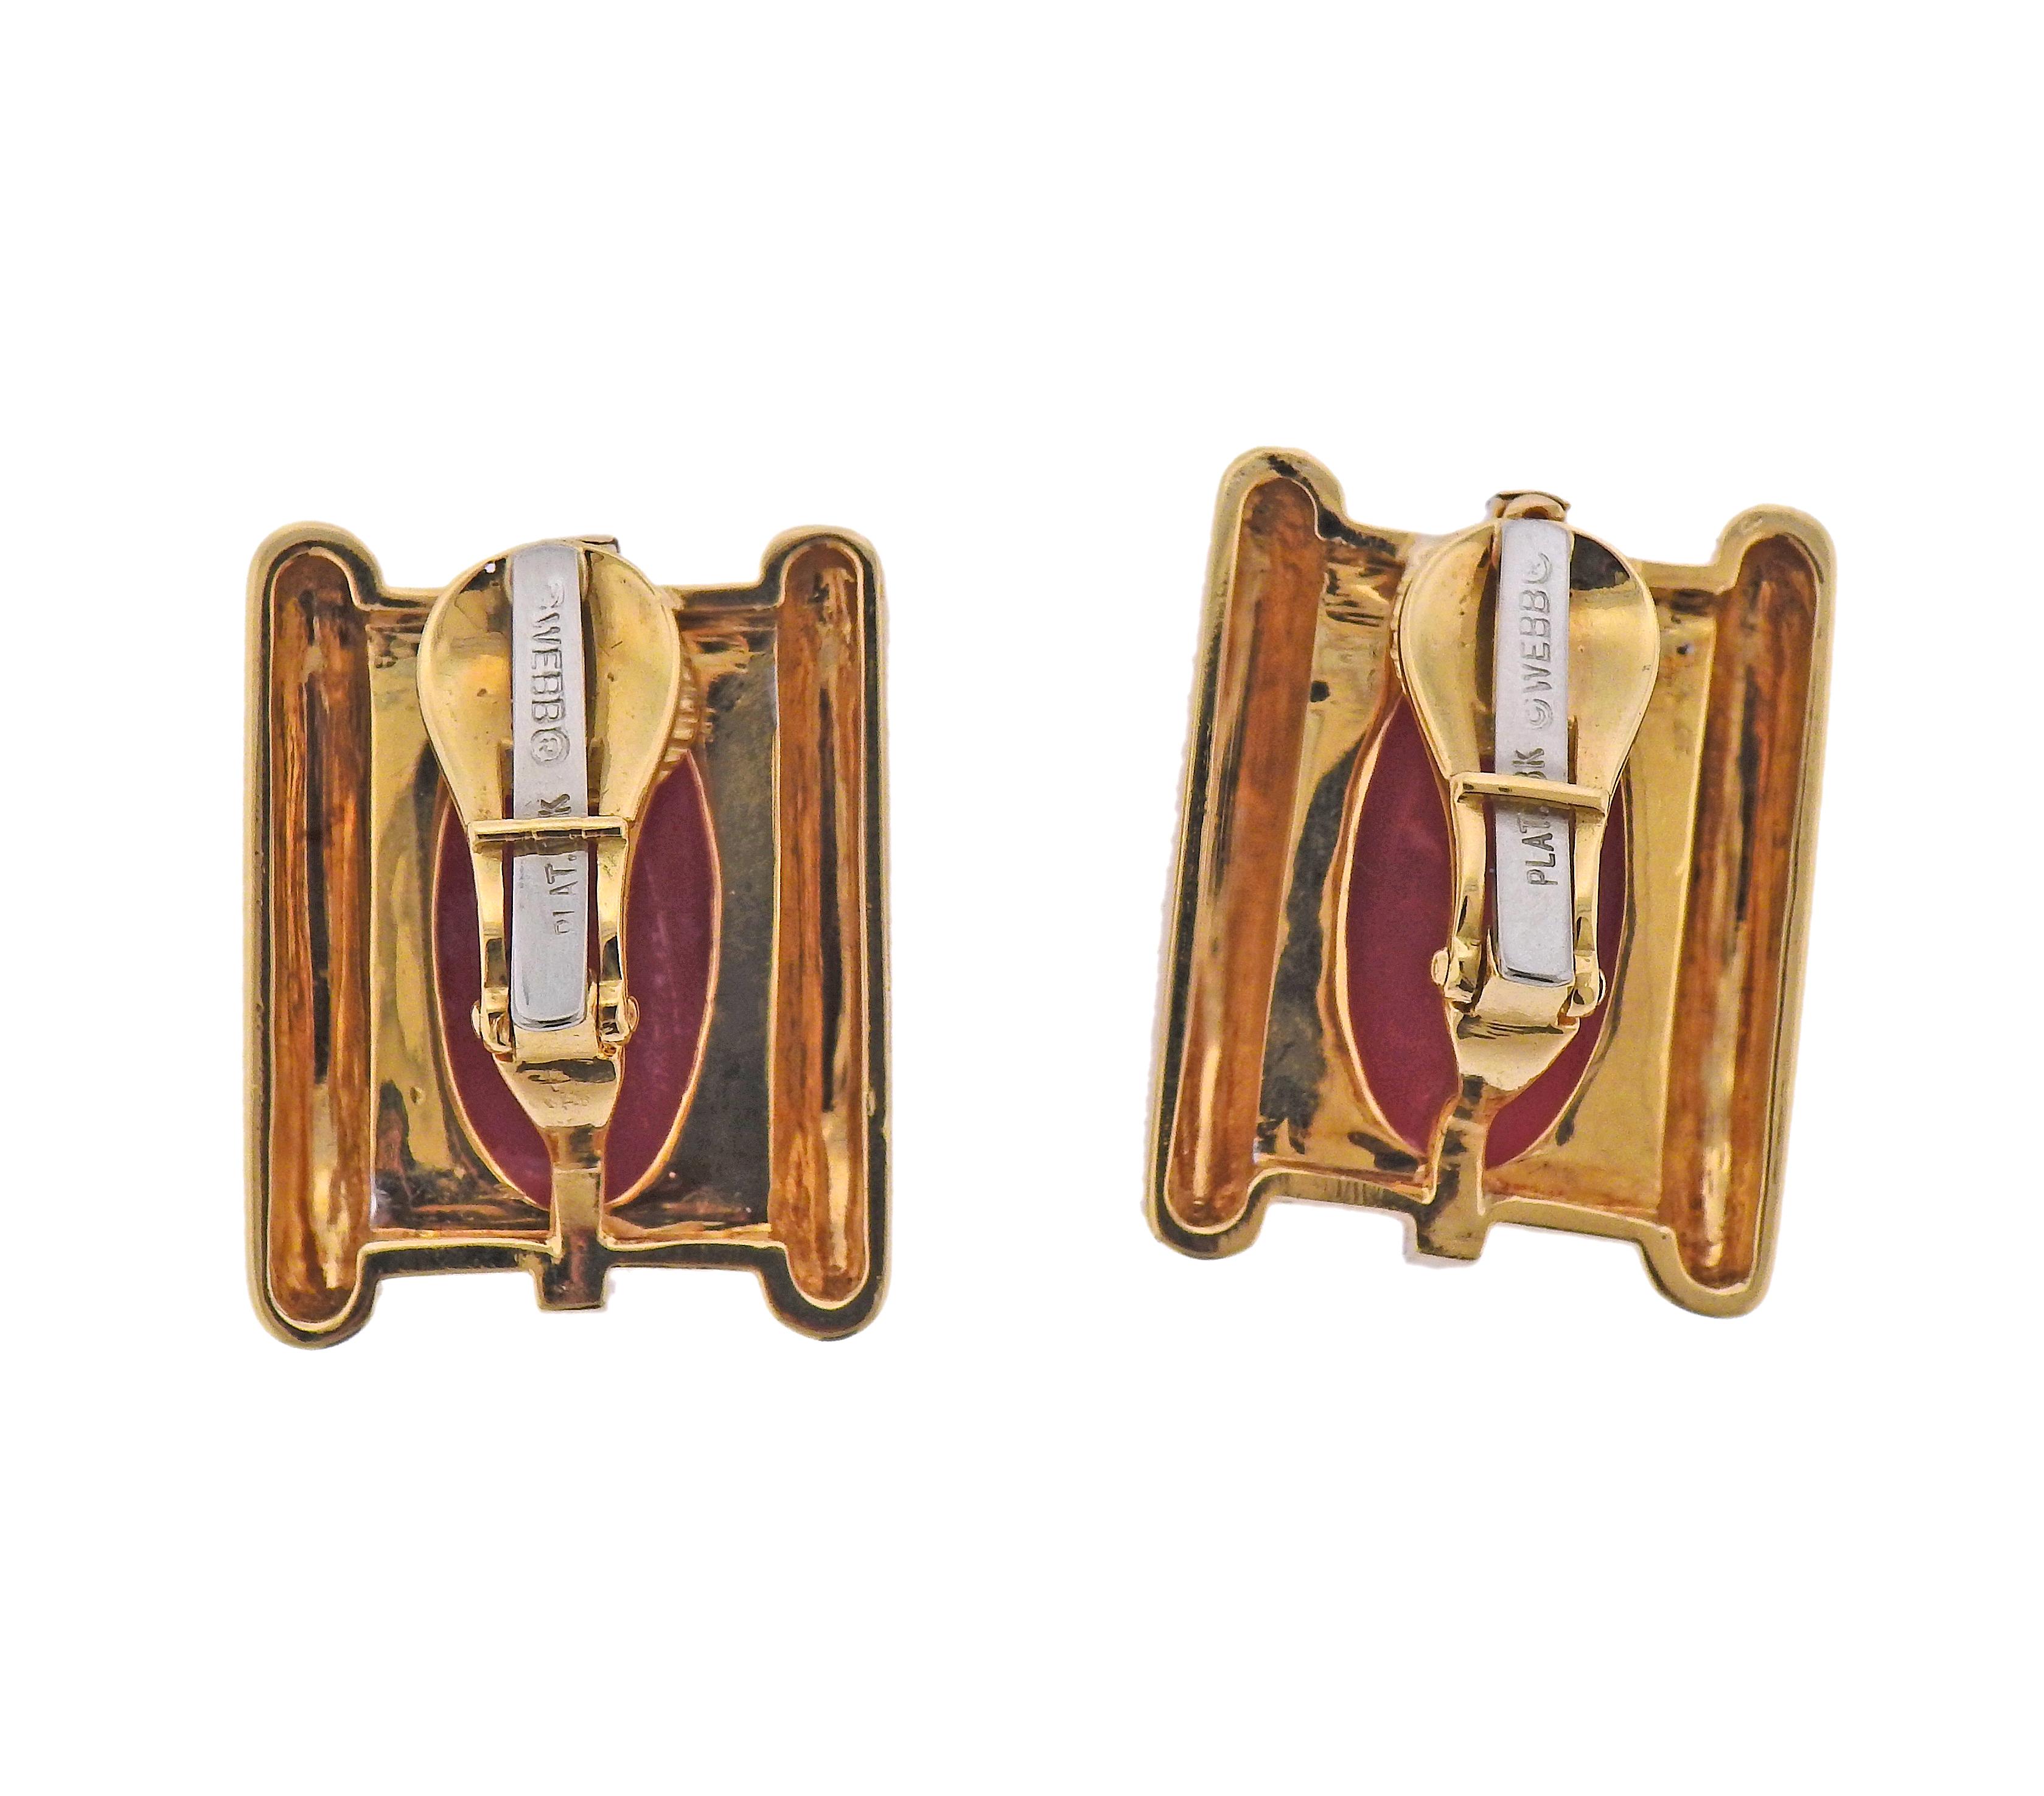 Pair of 18k gold and platinum earrings by David Webb, with black enamel accents, center corals and approx. 0.24ctw in diamonds. Earrings are 27mm x 22mm. Marked: Webb Plat 18k. Weight - 27.2 grams. 